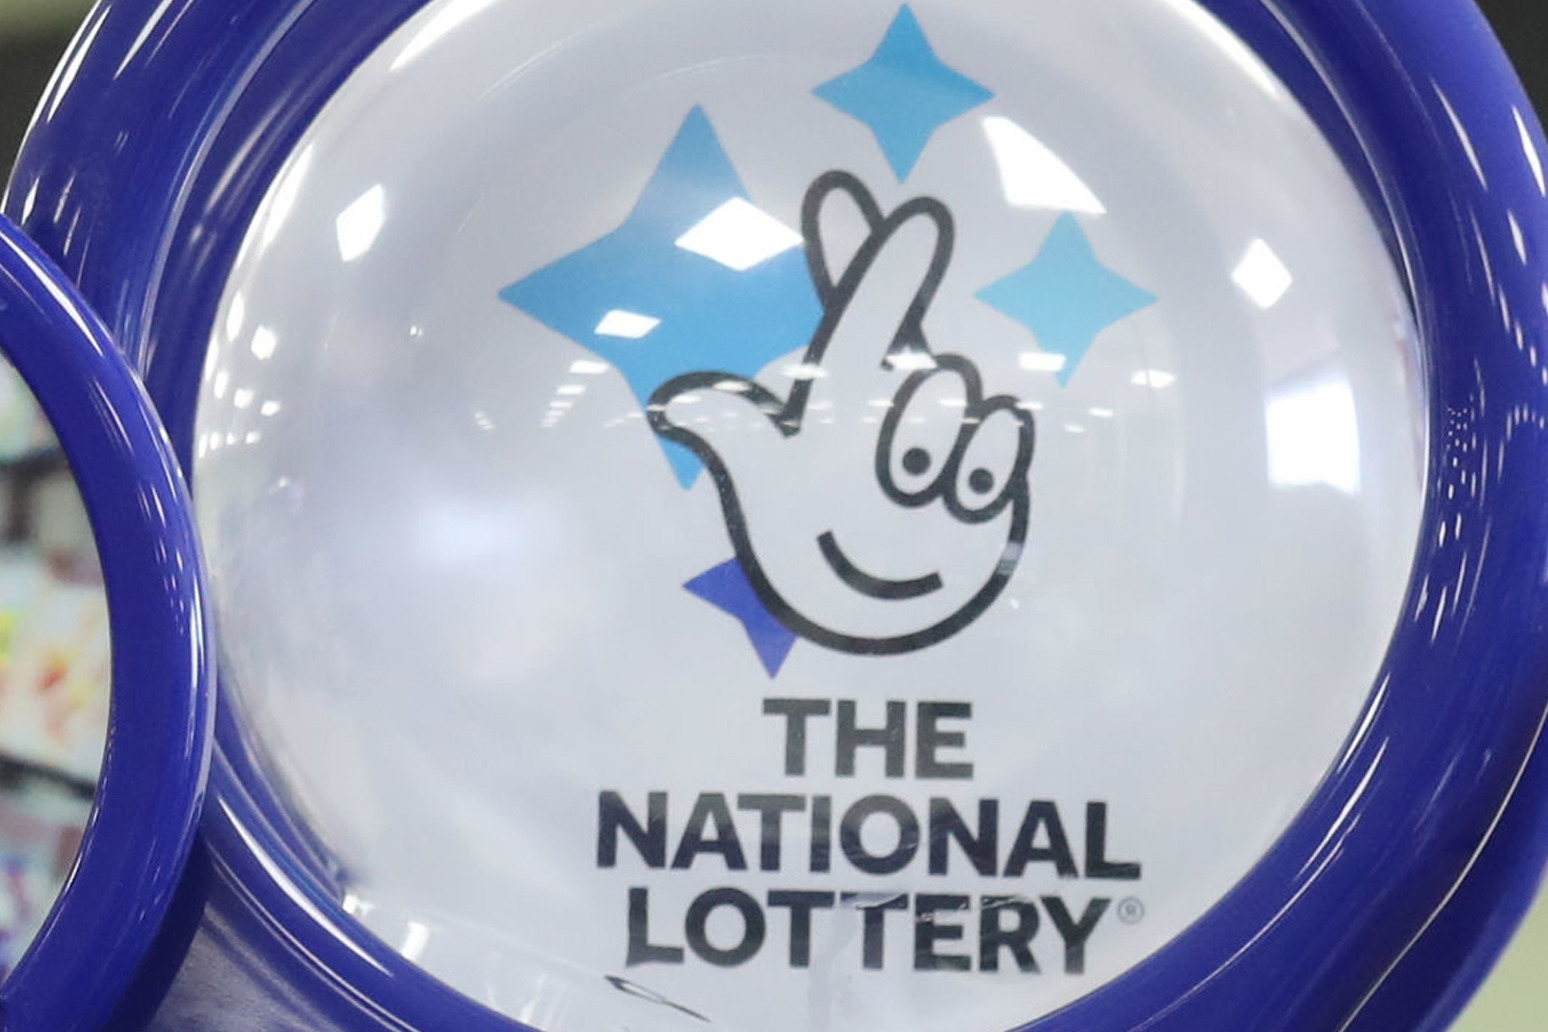 Top bosses to depart National Lottery operator Camelot when takeover completed 